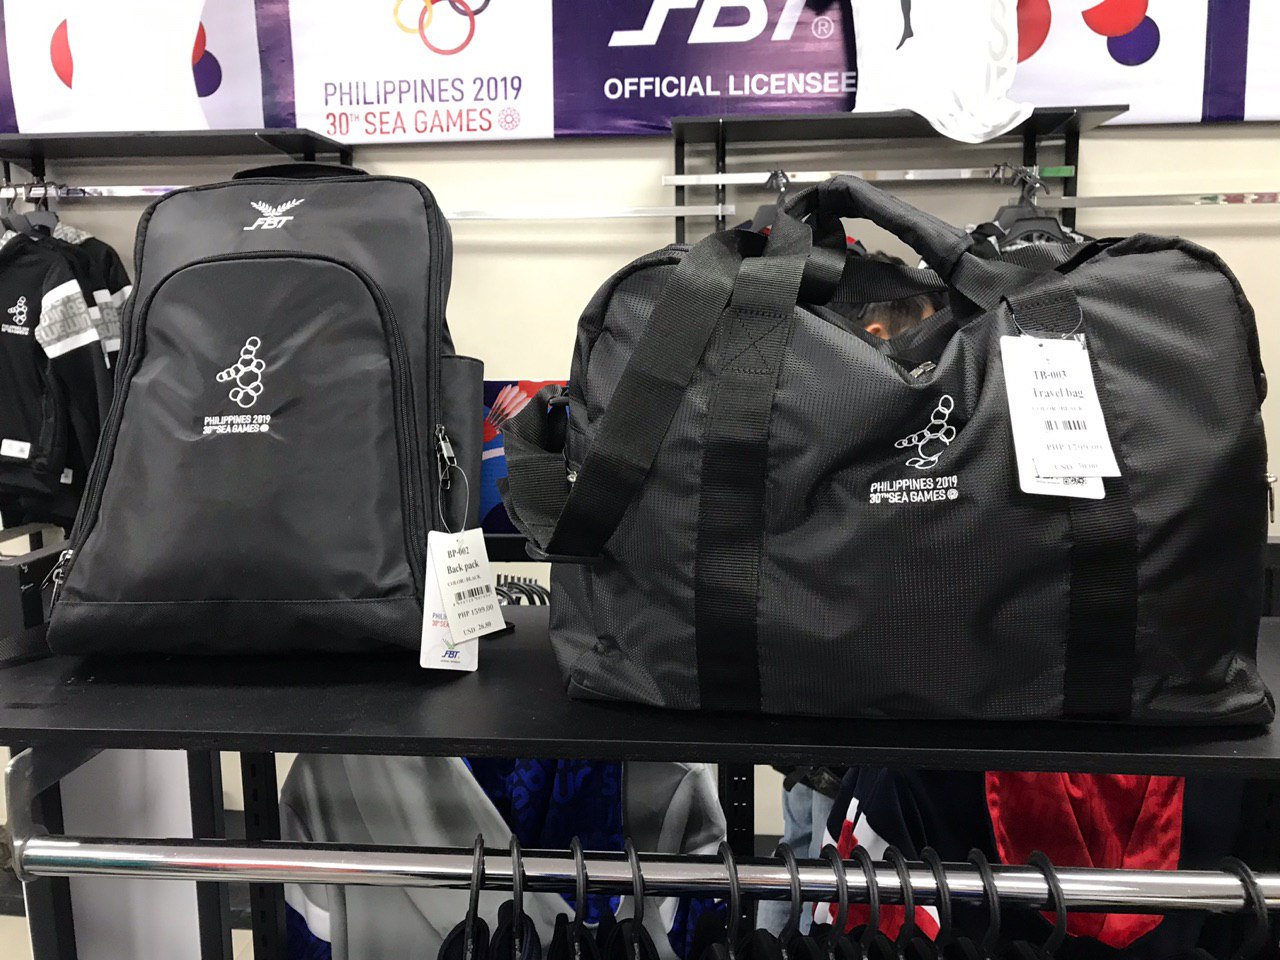 CARRY-ONS. The FBT backpack (left) and duffle bag cost P1,599 each (USD 26.5). Photo by Beatrice Go/Rappler 